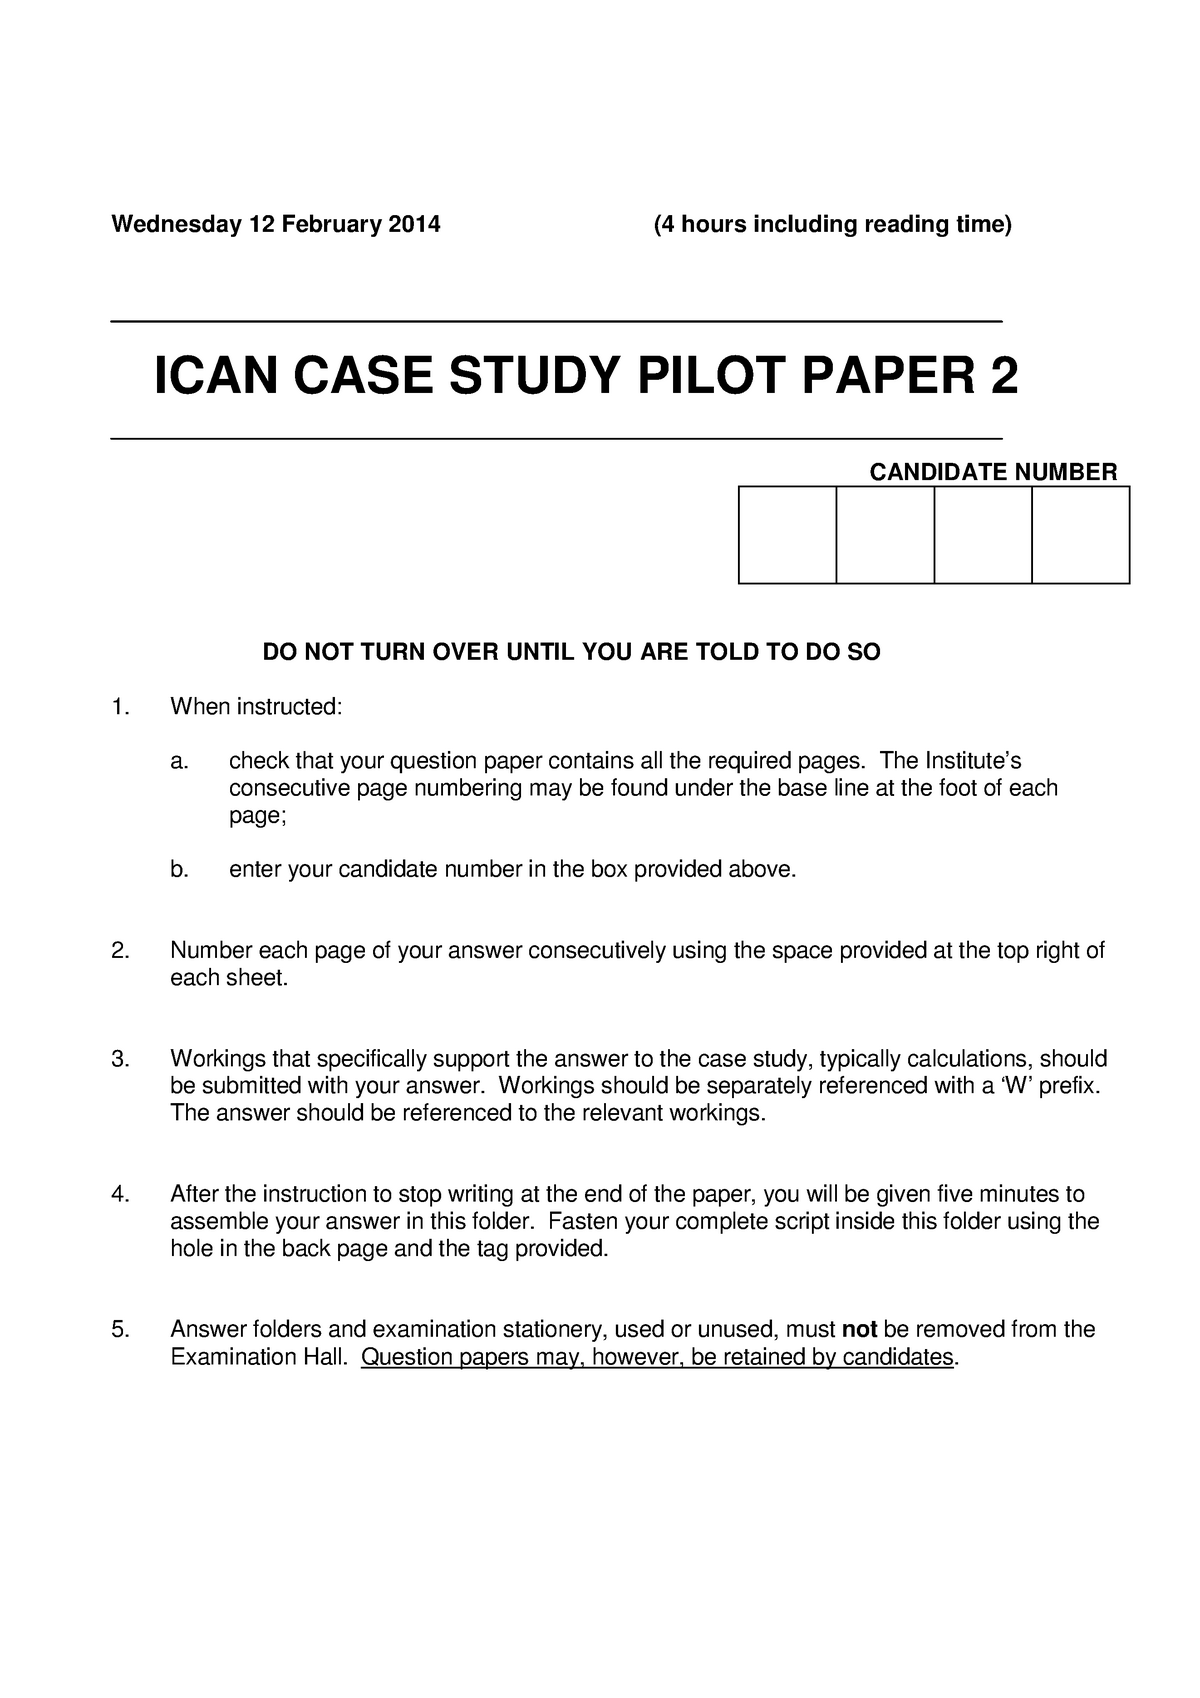 sample of ican case study report